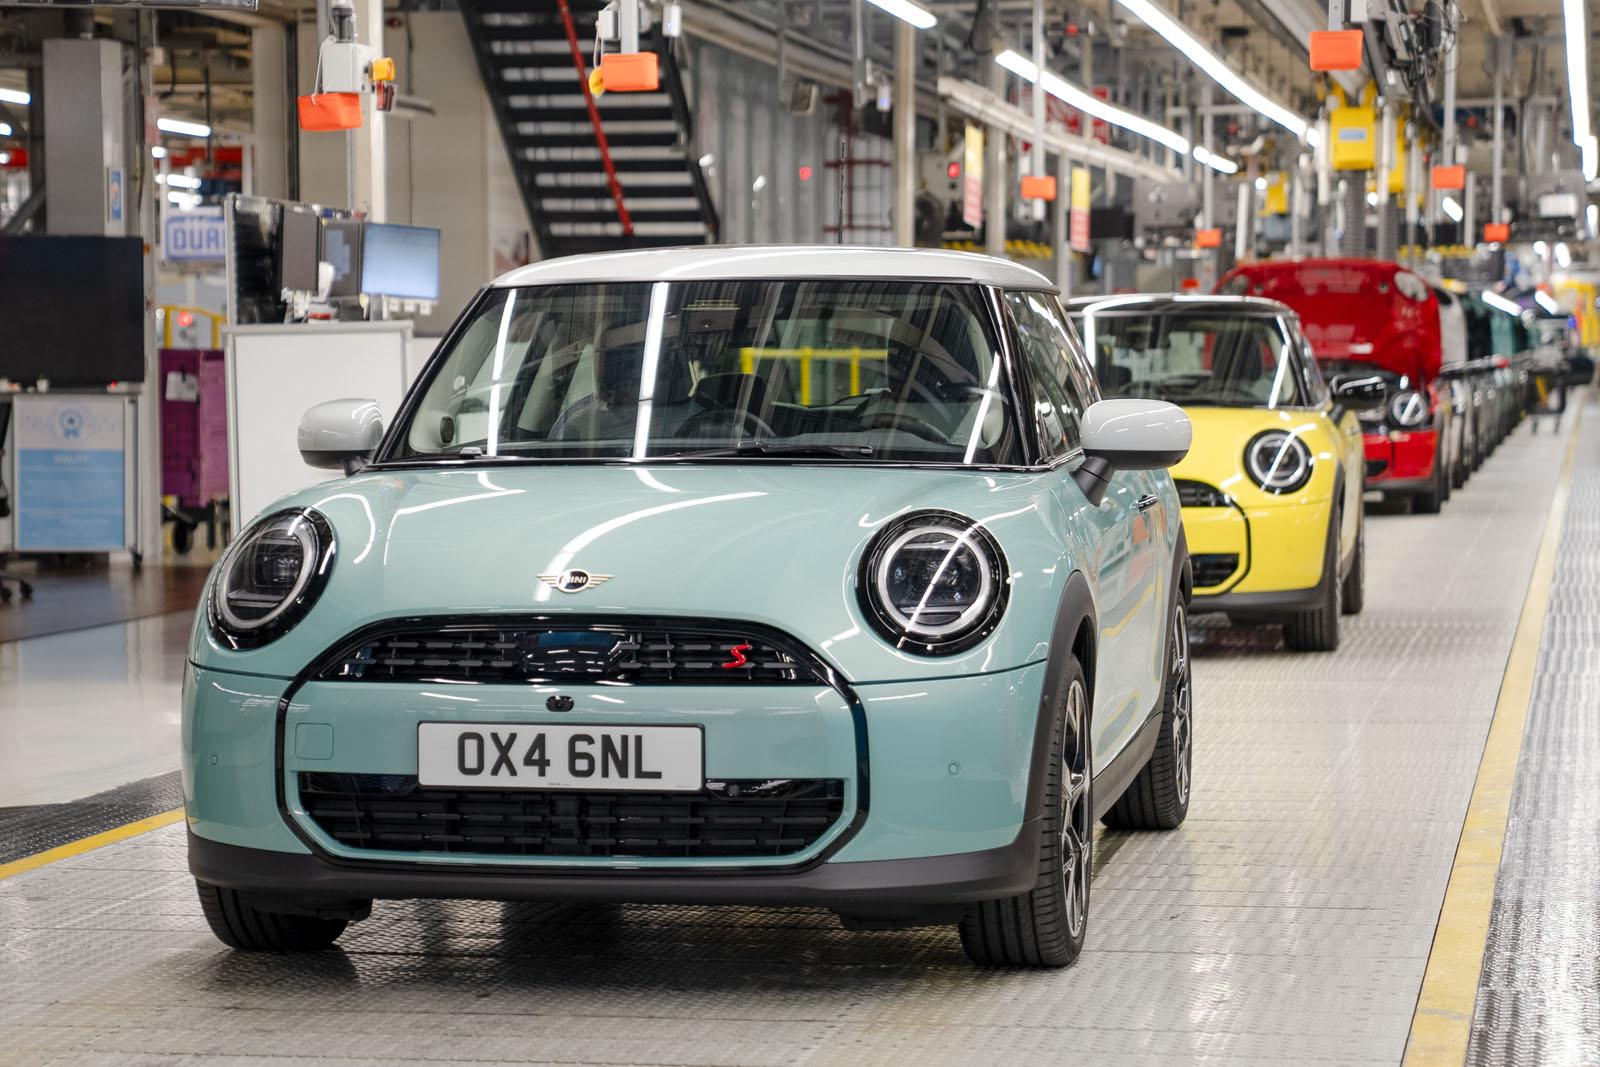 UK car production falls amid several model changeovers